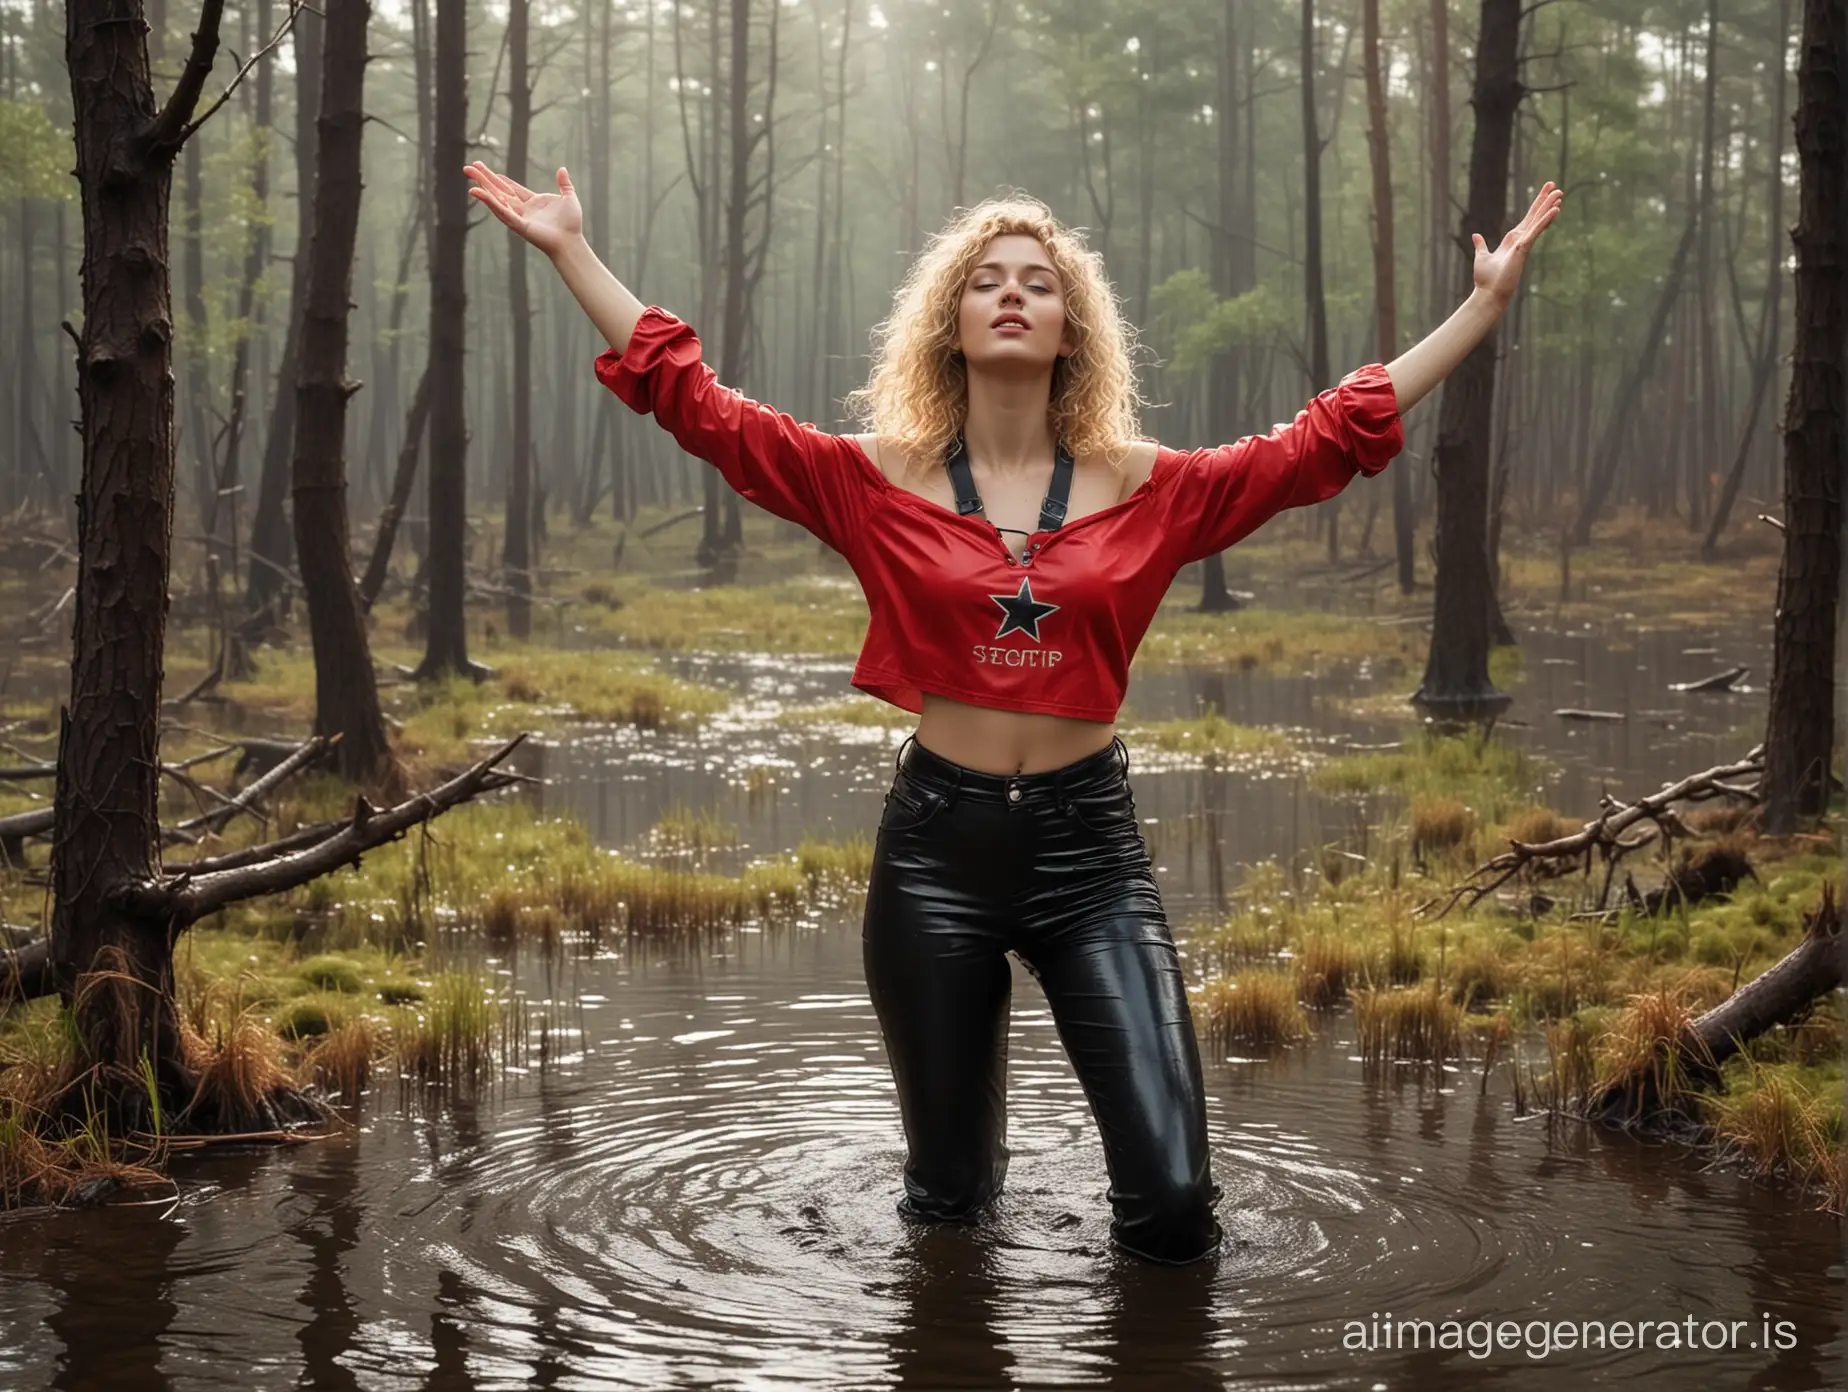 Fashion-Model-in-CCCP-OffShoulder-Shirt-Poses-in-Swamp-at-Dawn